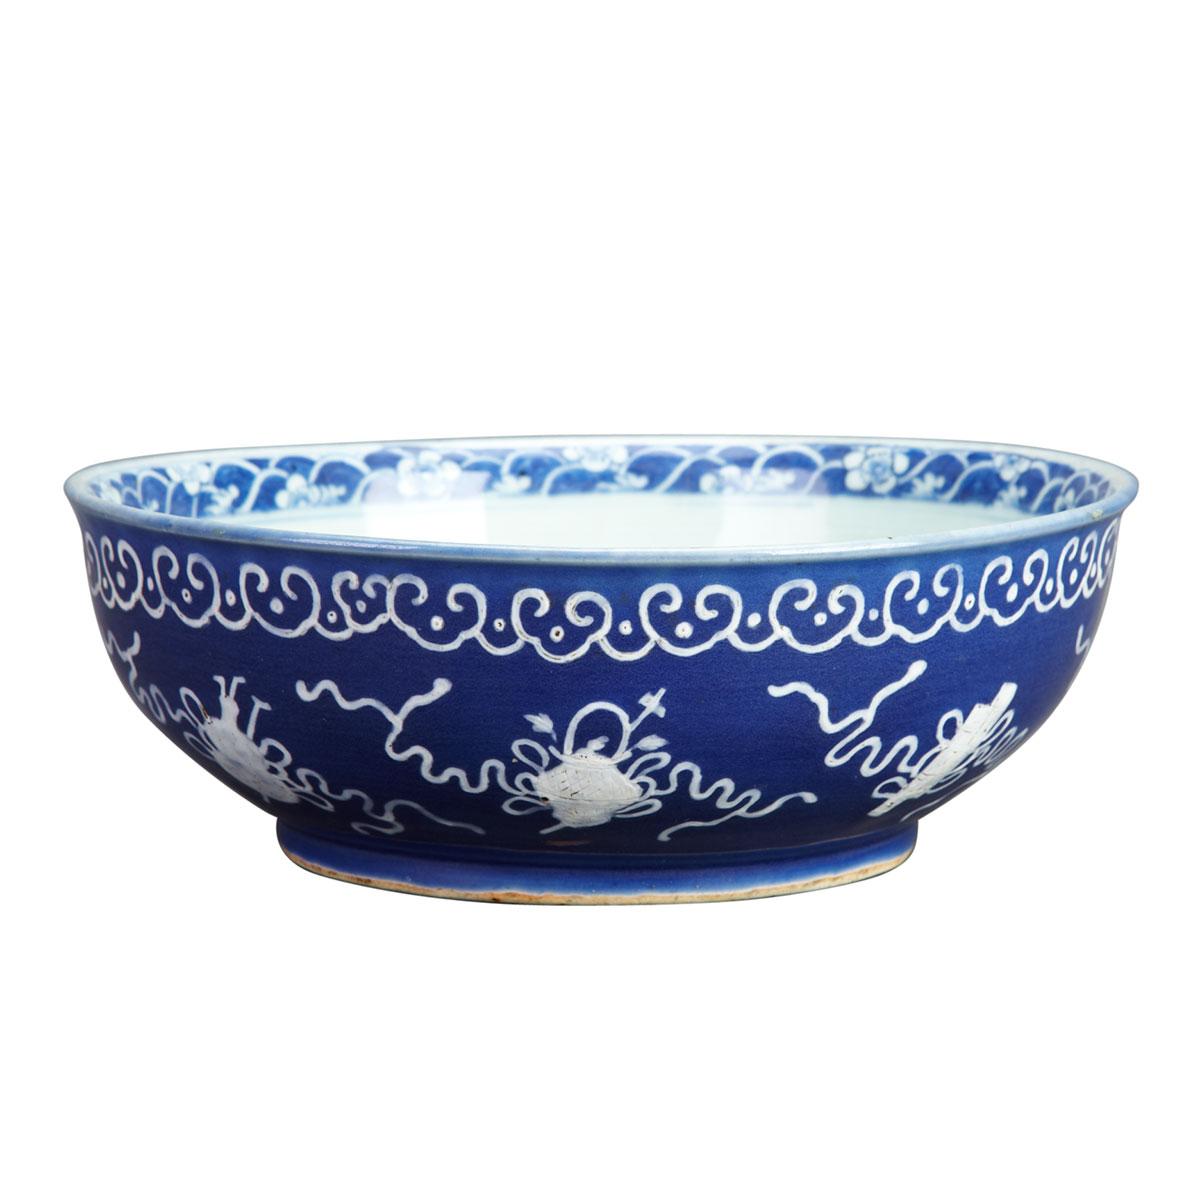 Large Blue and White Slip Decorated Dice Bowl, Qianlong Mark, 19th Century